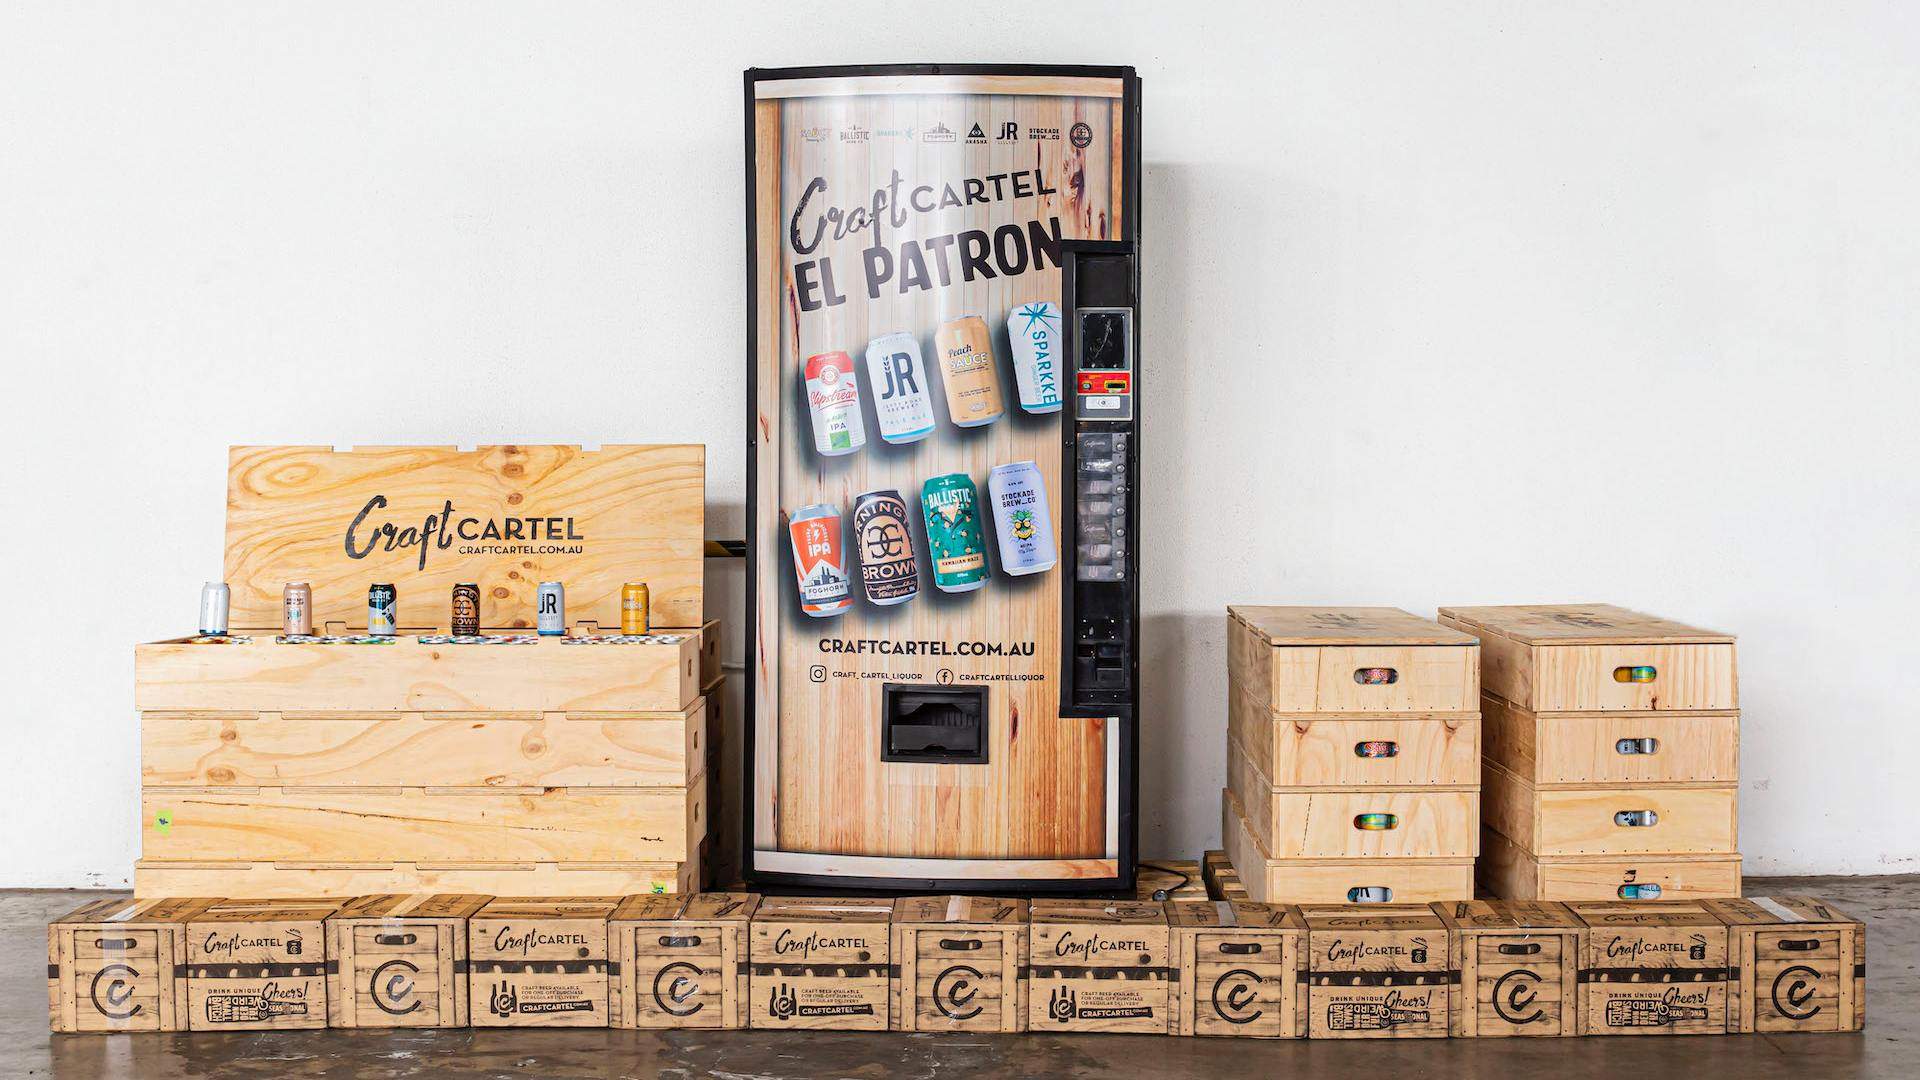 This Indulgent New Booze Membership Includes an Entire Beer Vending Machine and a Year of Refills